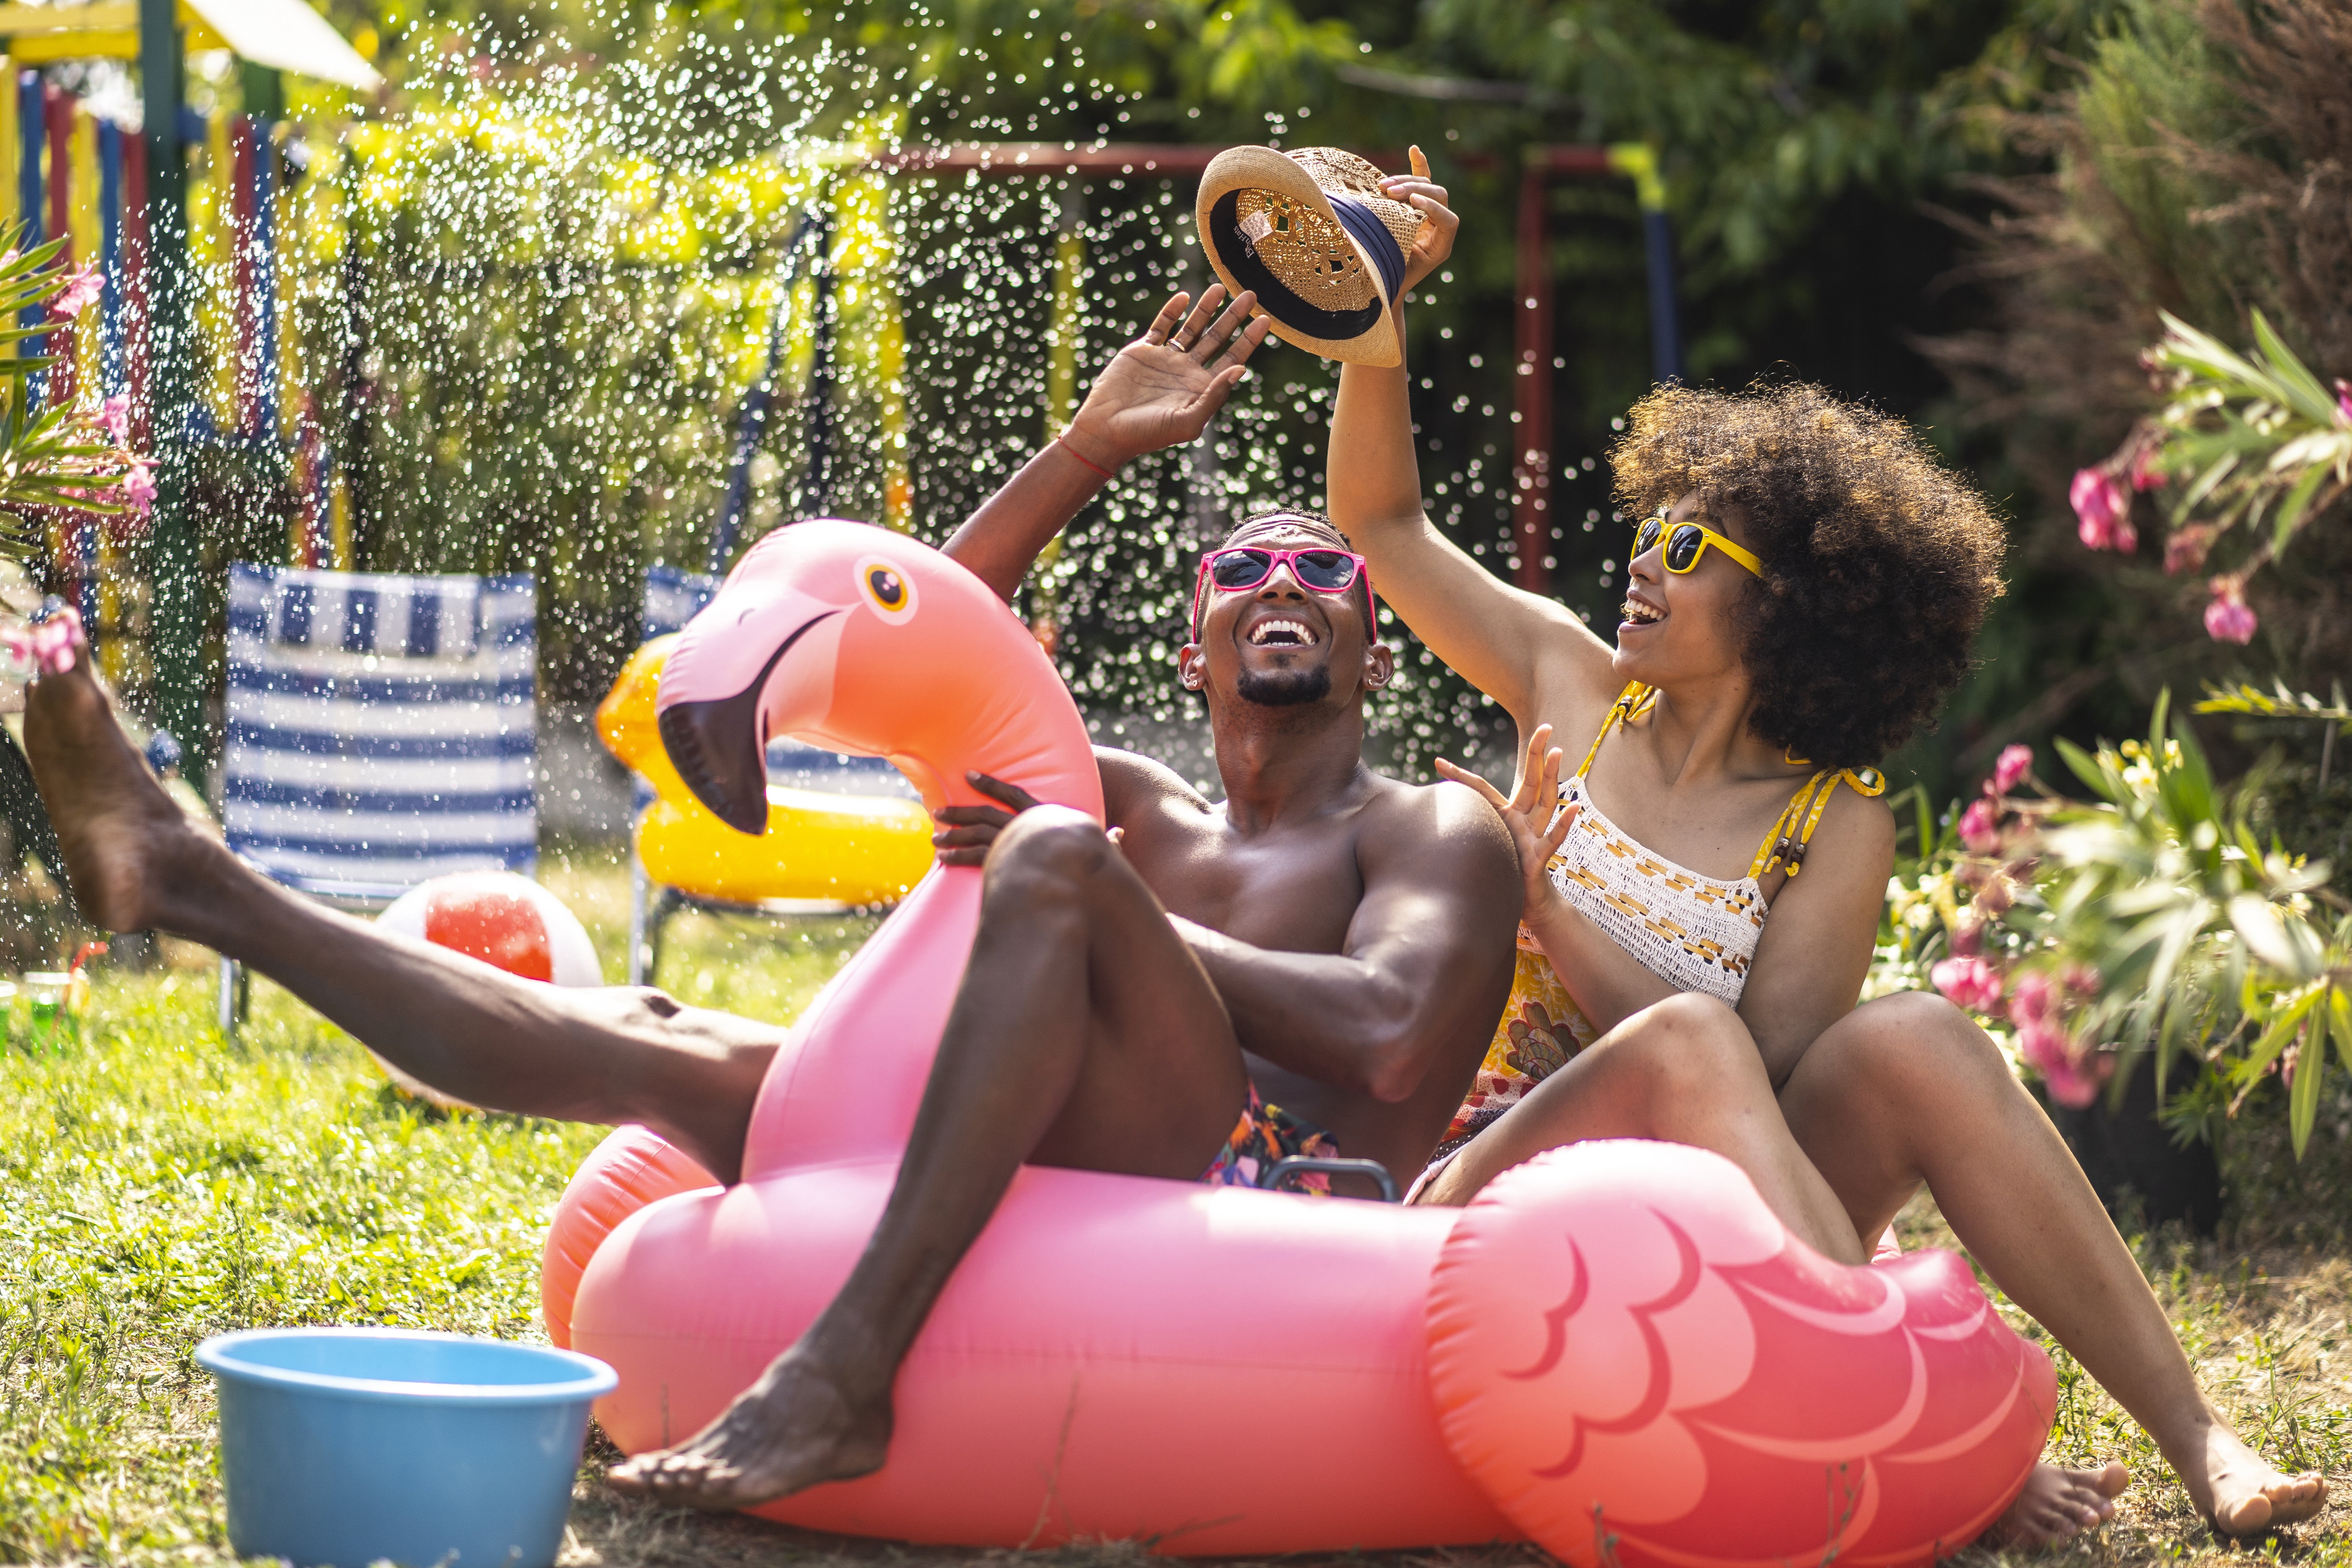 Man and woman relax and laugh in an inflatable flamingo pool